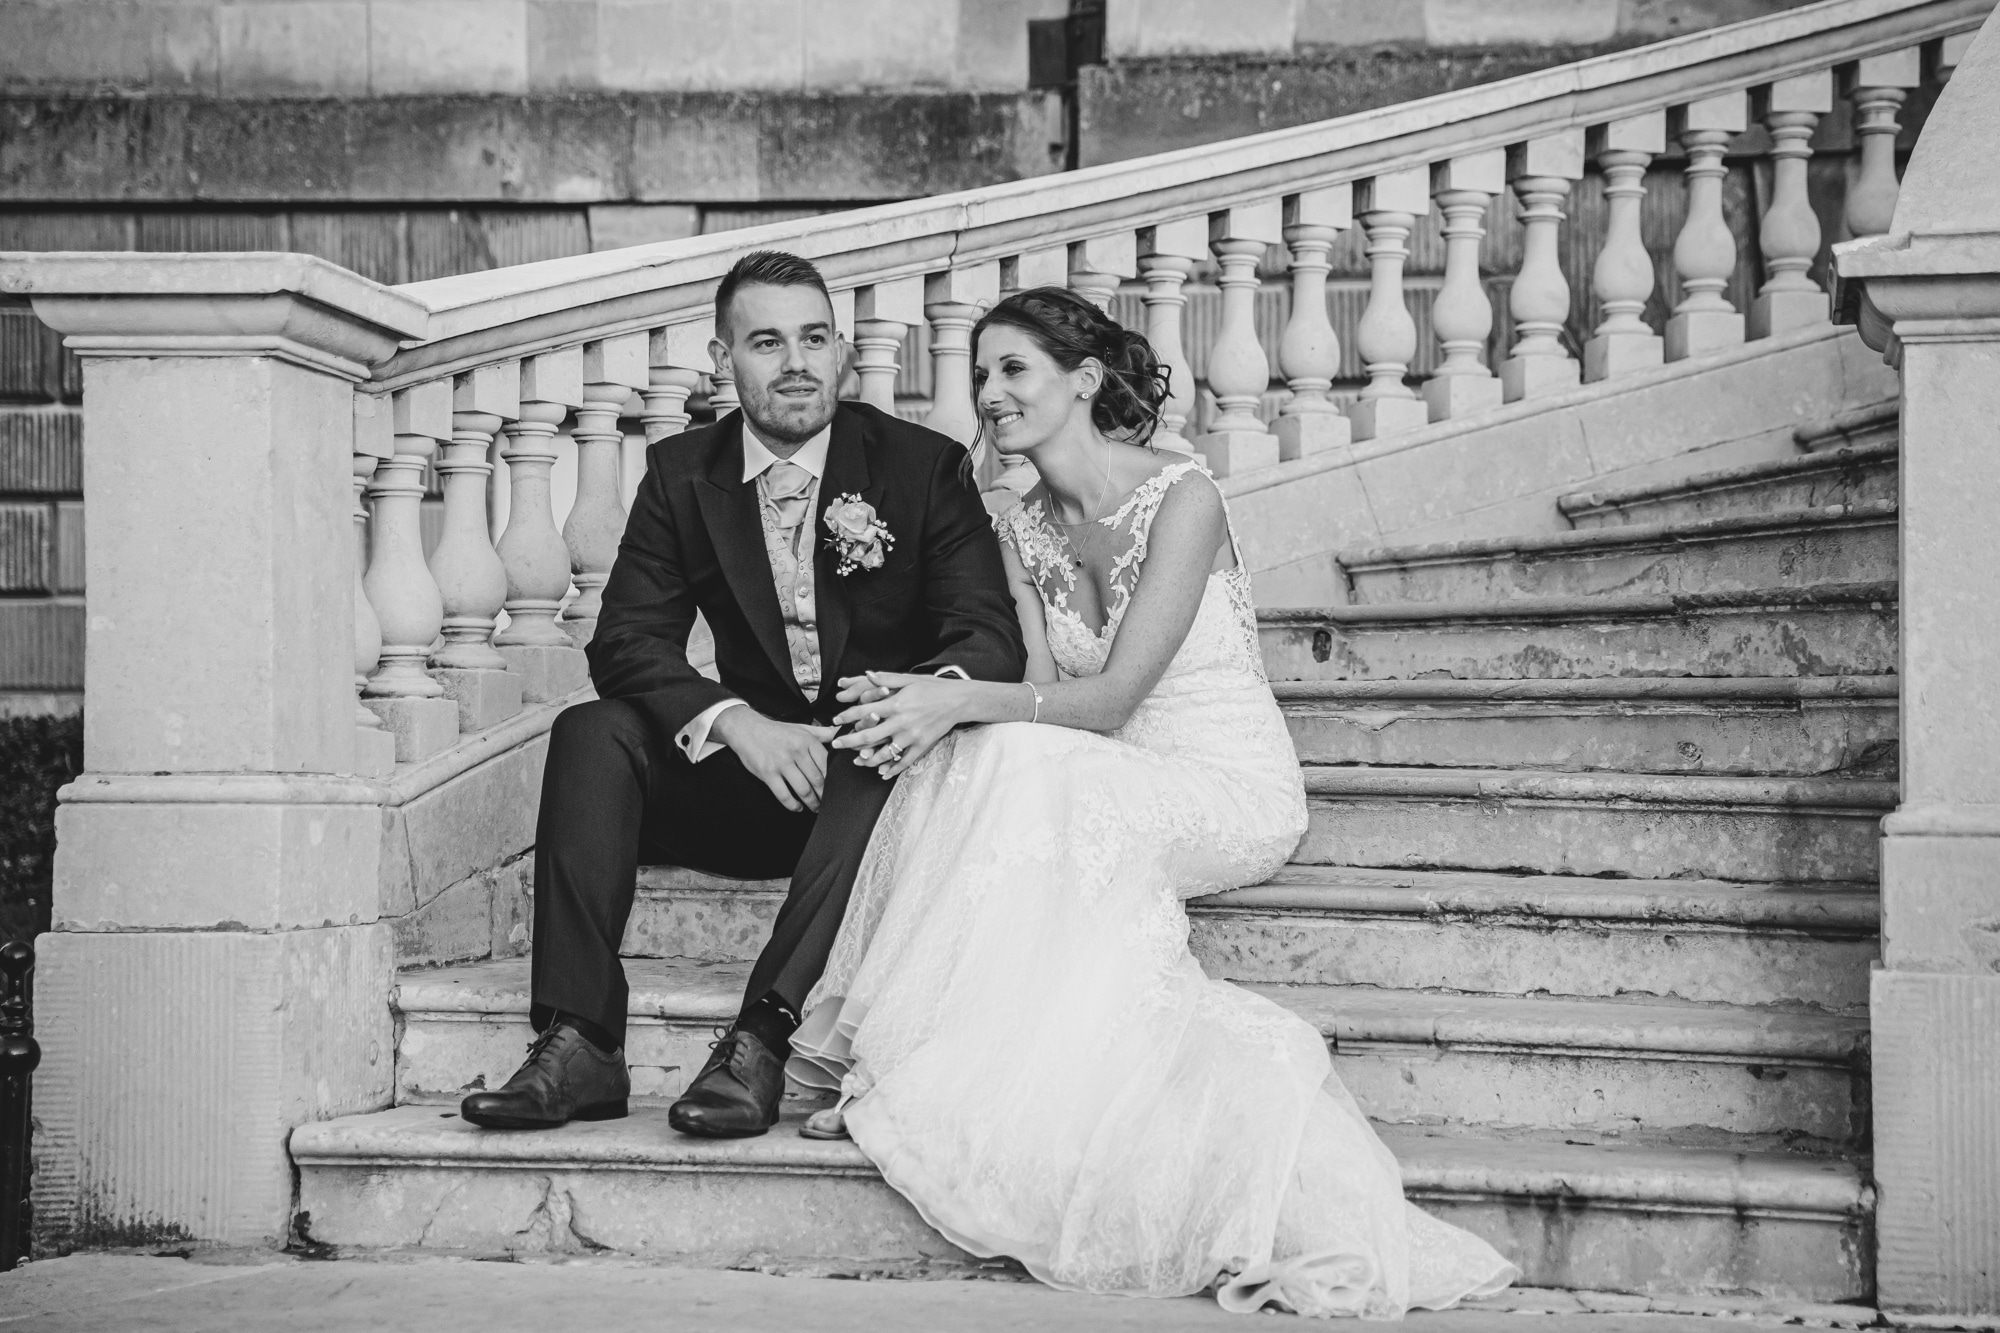 Bride & Groom on steps sharing a quiet moment